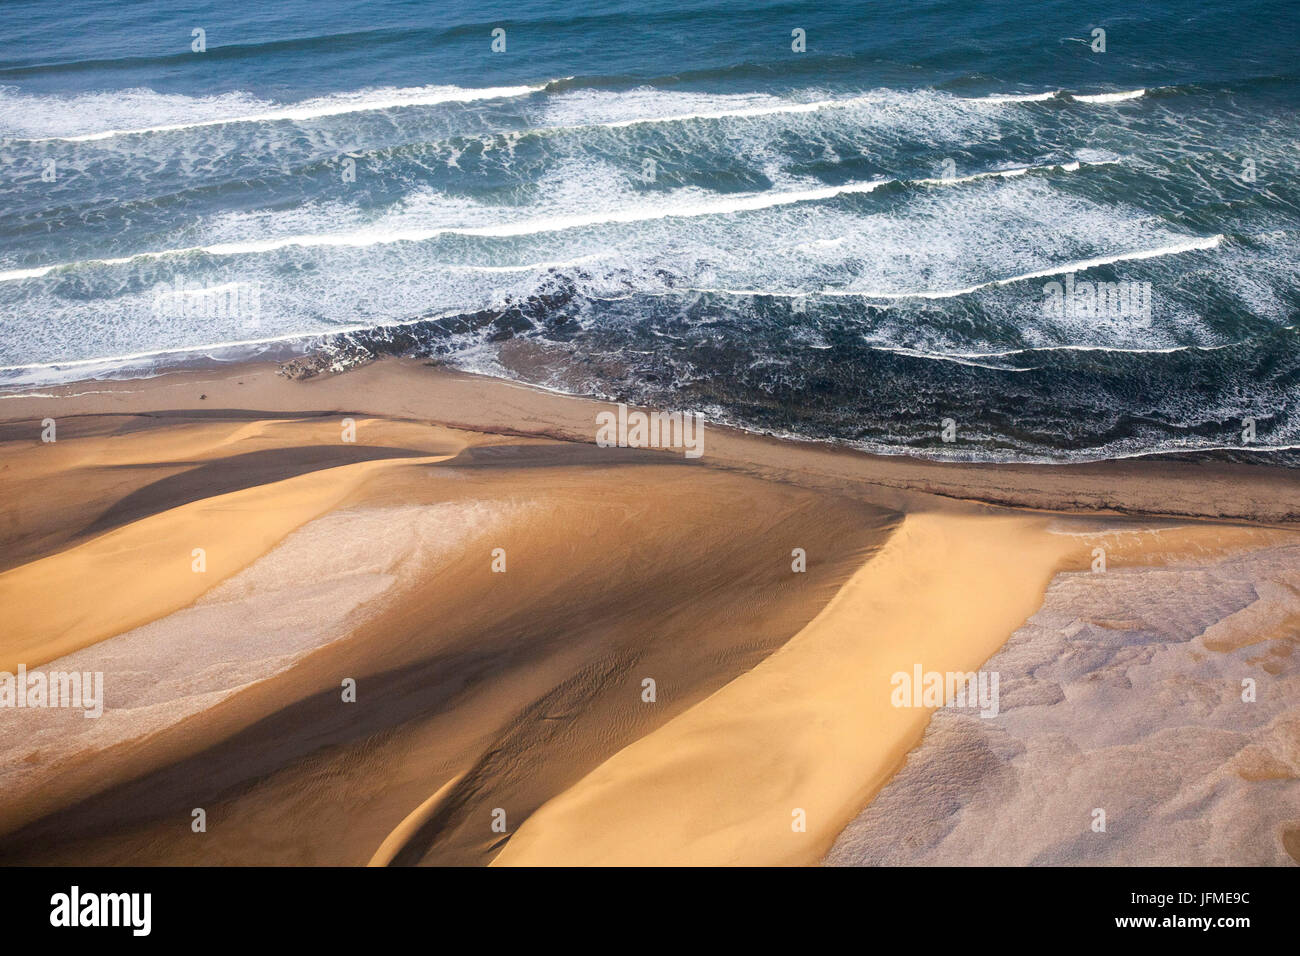 Aerial view of waves of the Atlantic Ocean crashing against the sandy dunes of the Namib desert Namibia Southern Africa Stock Photo